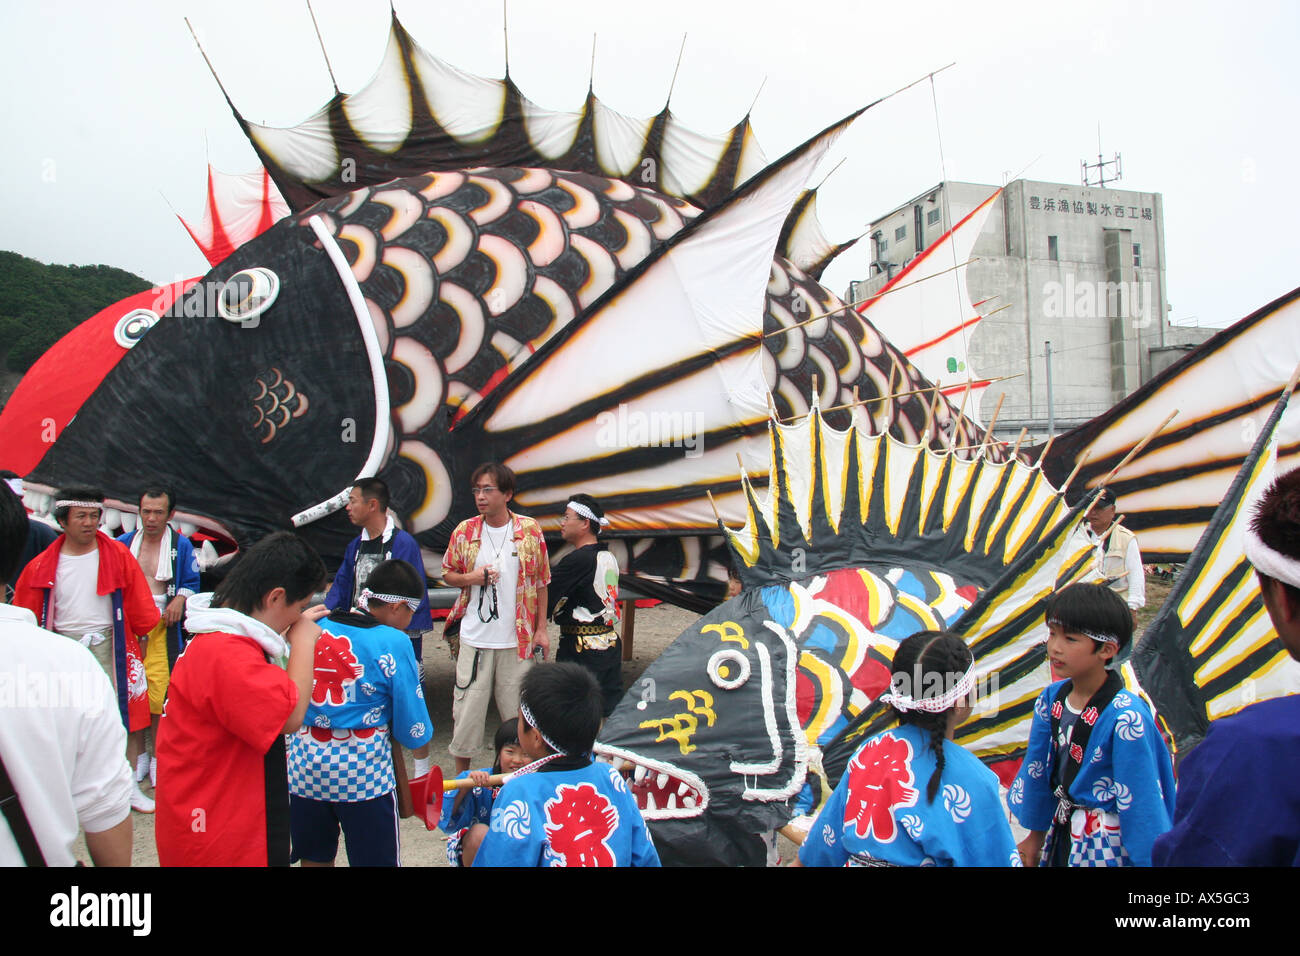 Giant fish floats at a summer festival in Japan Stock Photo